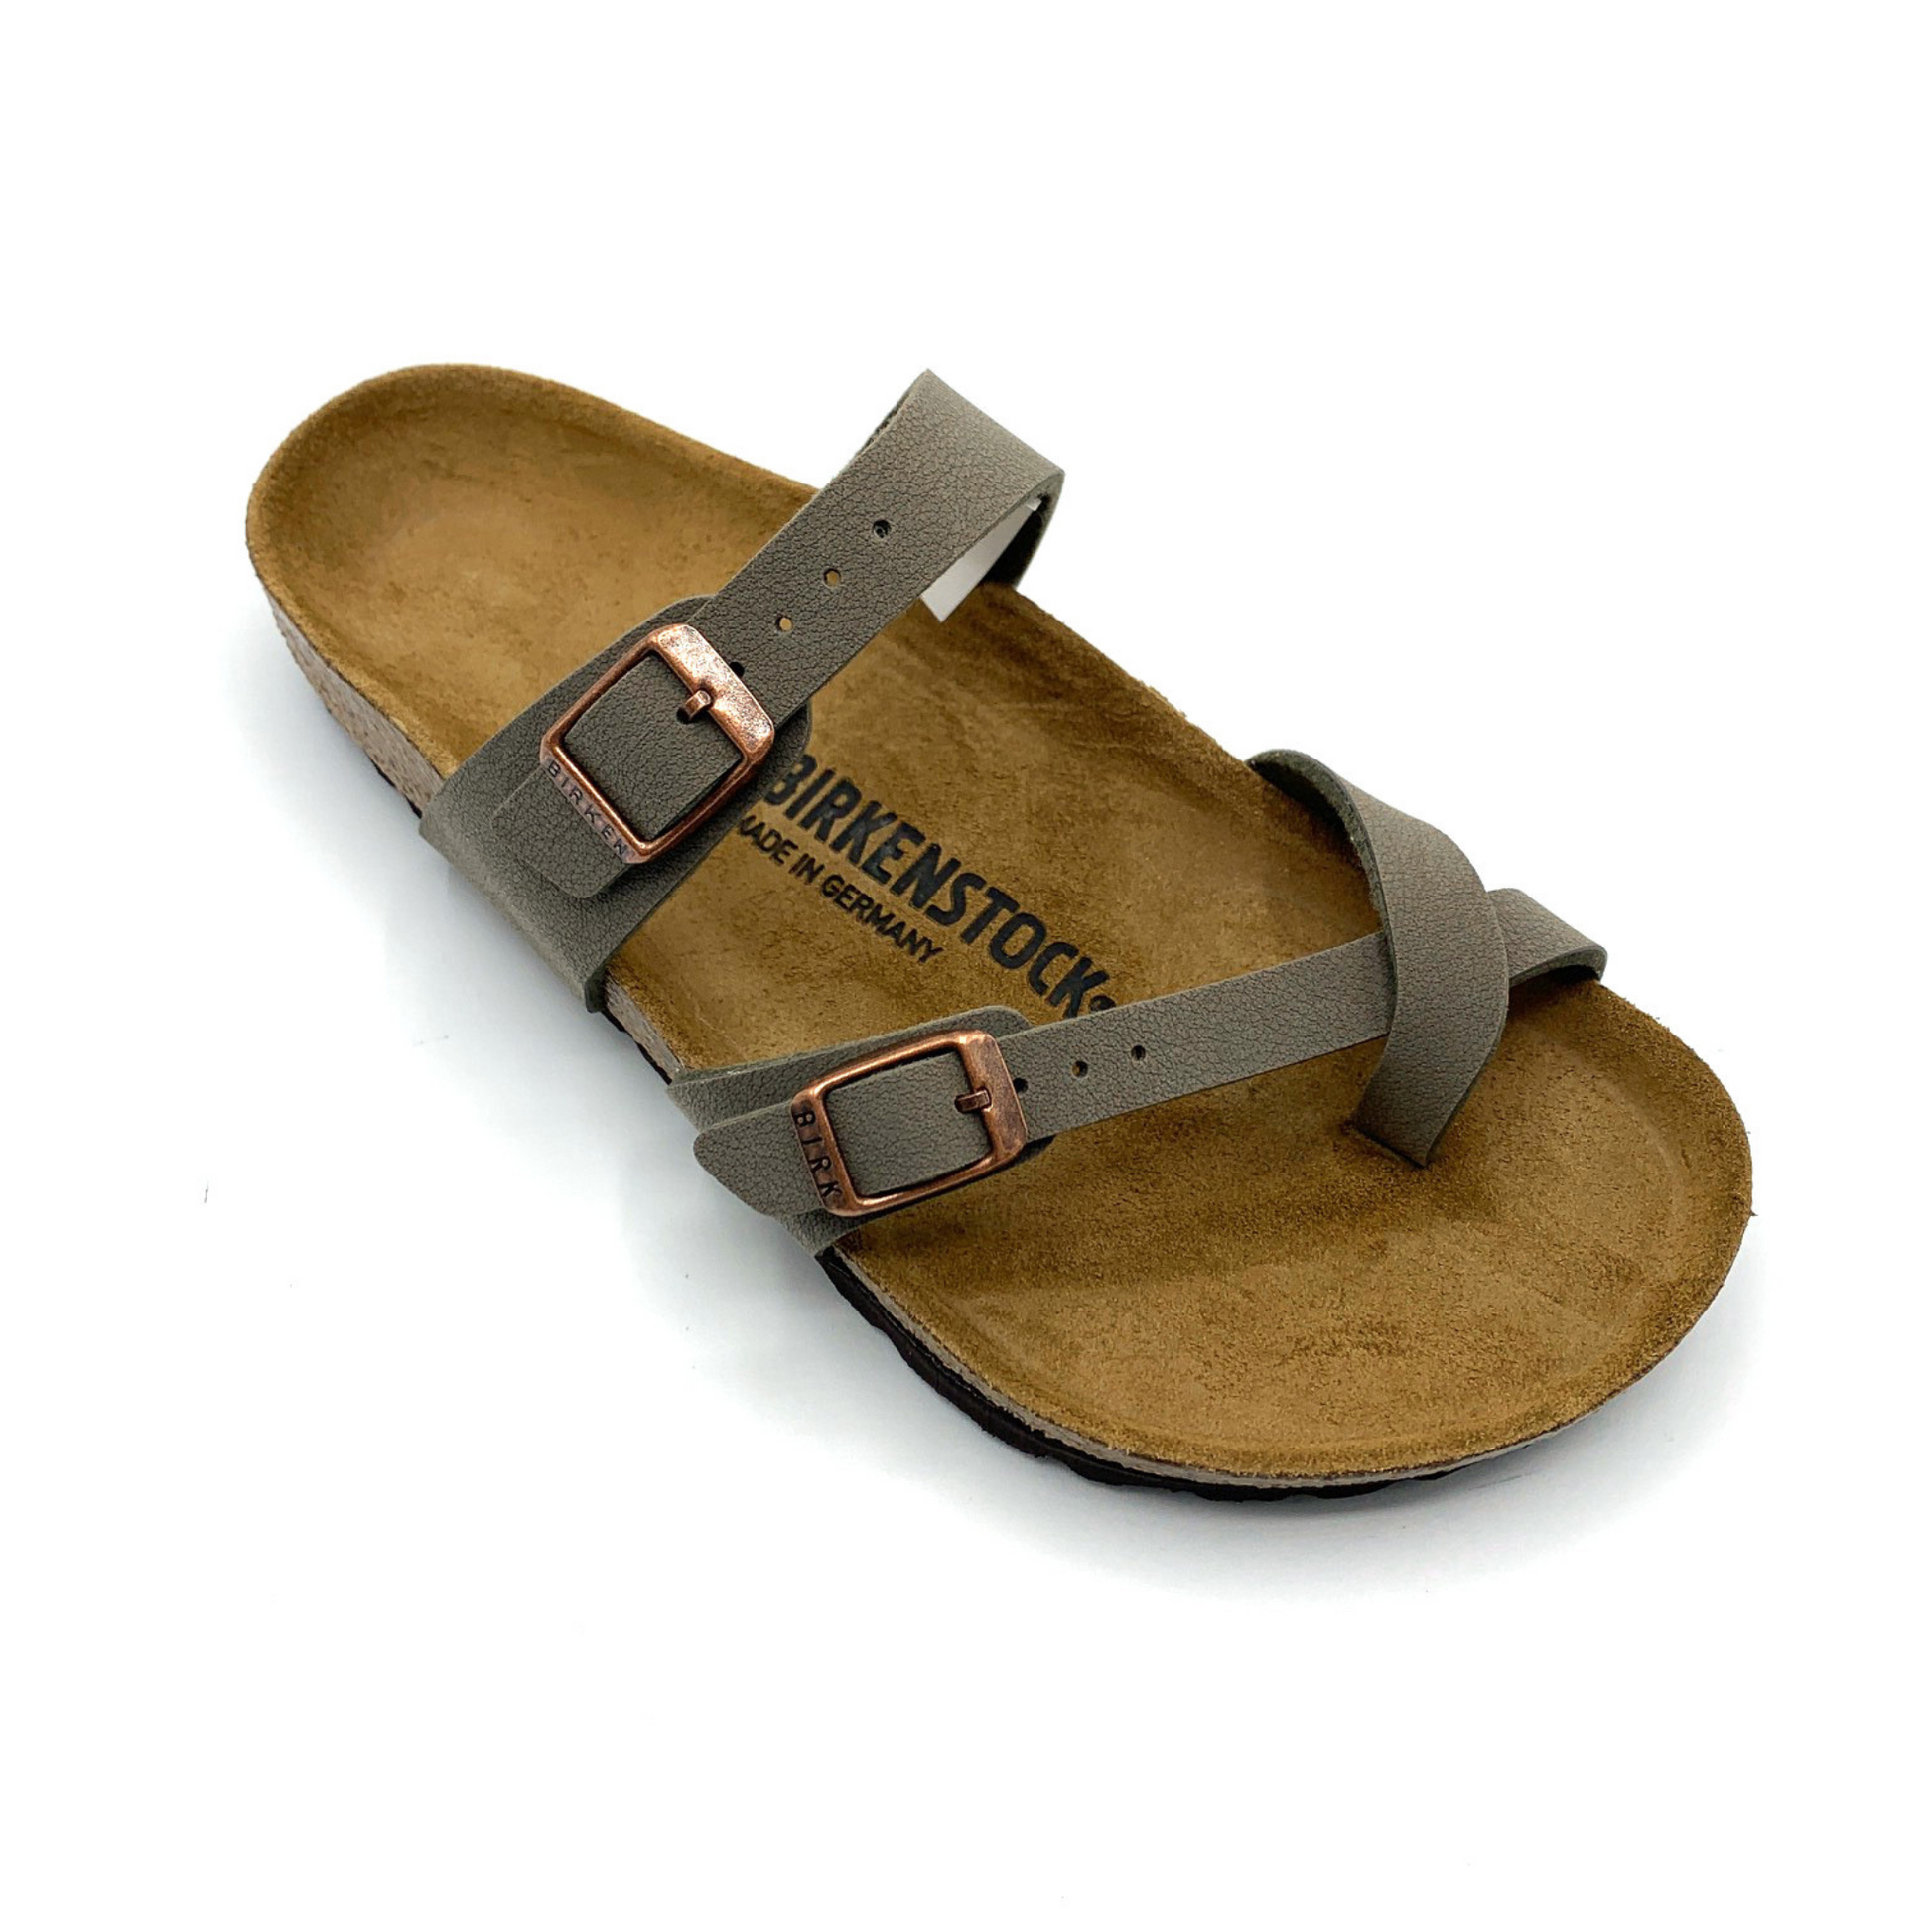 A 45 degree angle view of a sandal with a caramel-brown cork sole, two grey straps, and copper coloured buckles. One of the straps goes over the upper part of the foot, and the other goes between the toes.